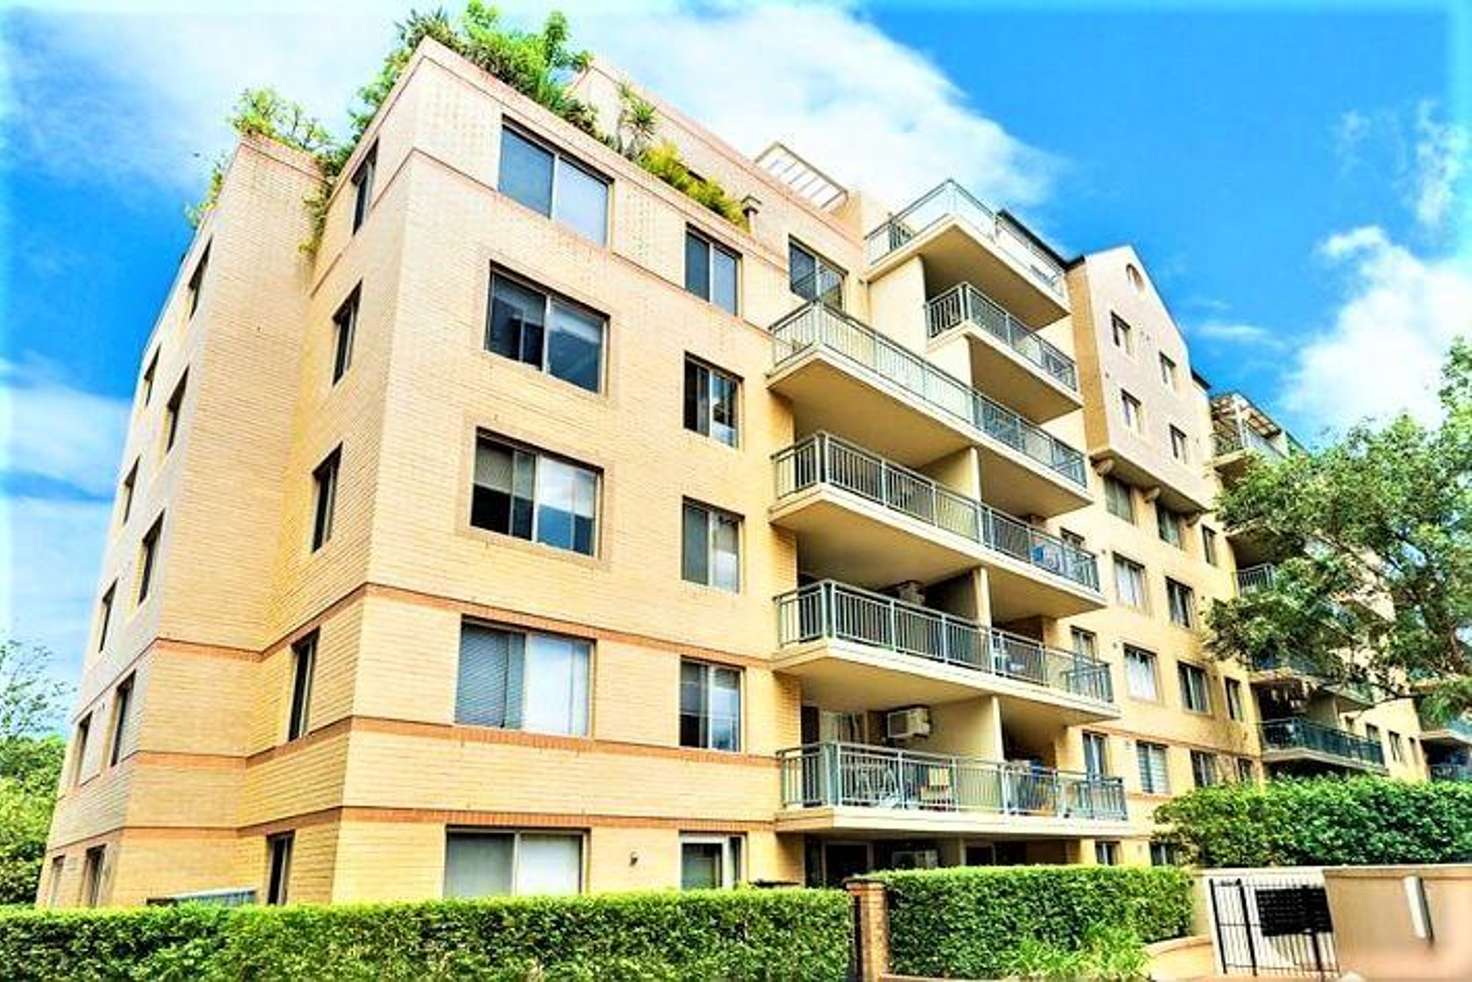 Main view of Homely unit listing, 14/18 Sorrell Street, Parramatta NSW 2150